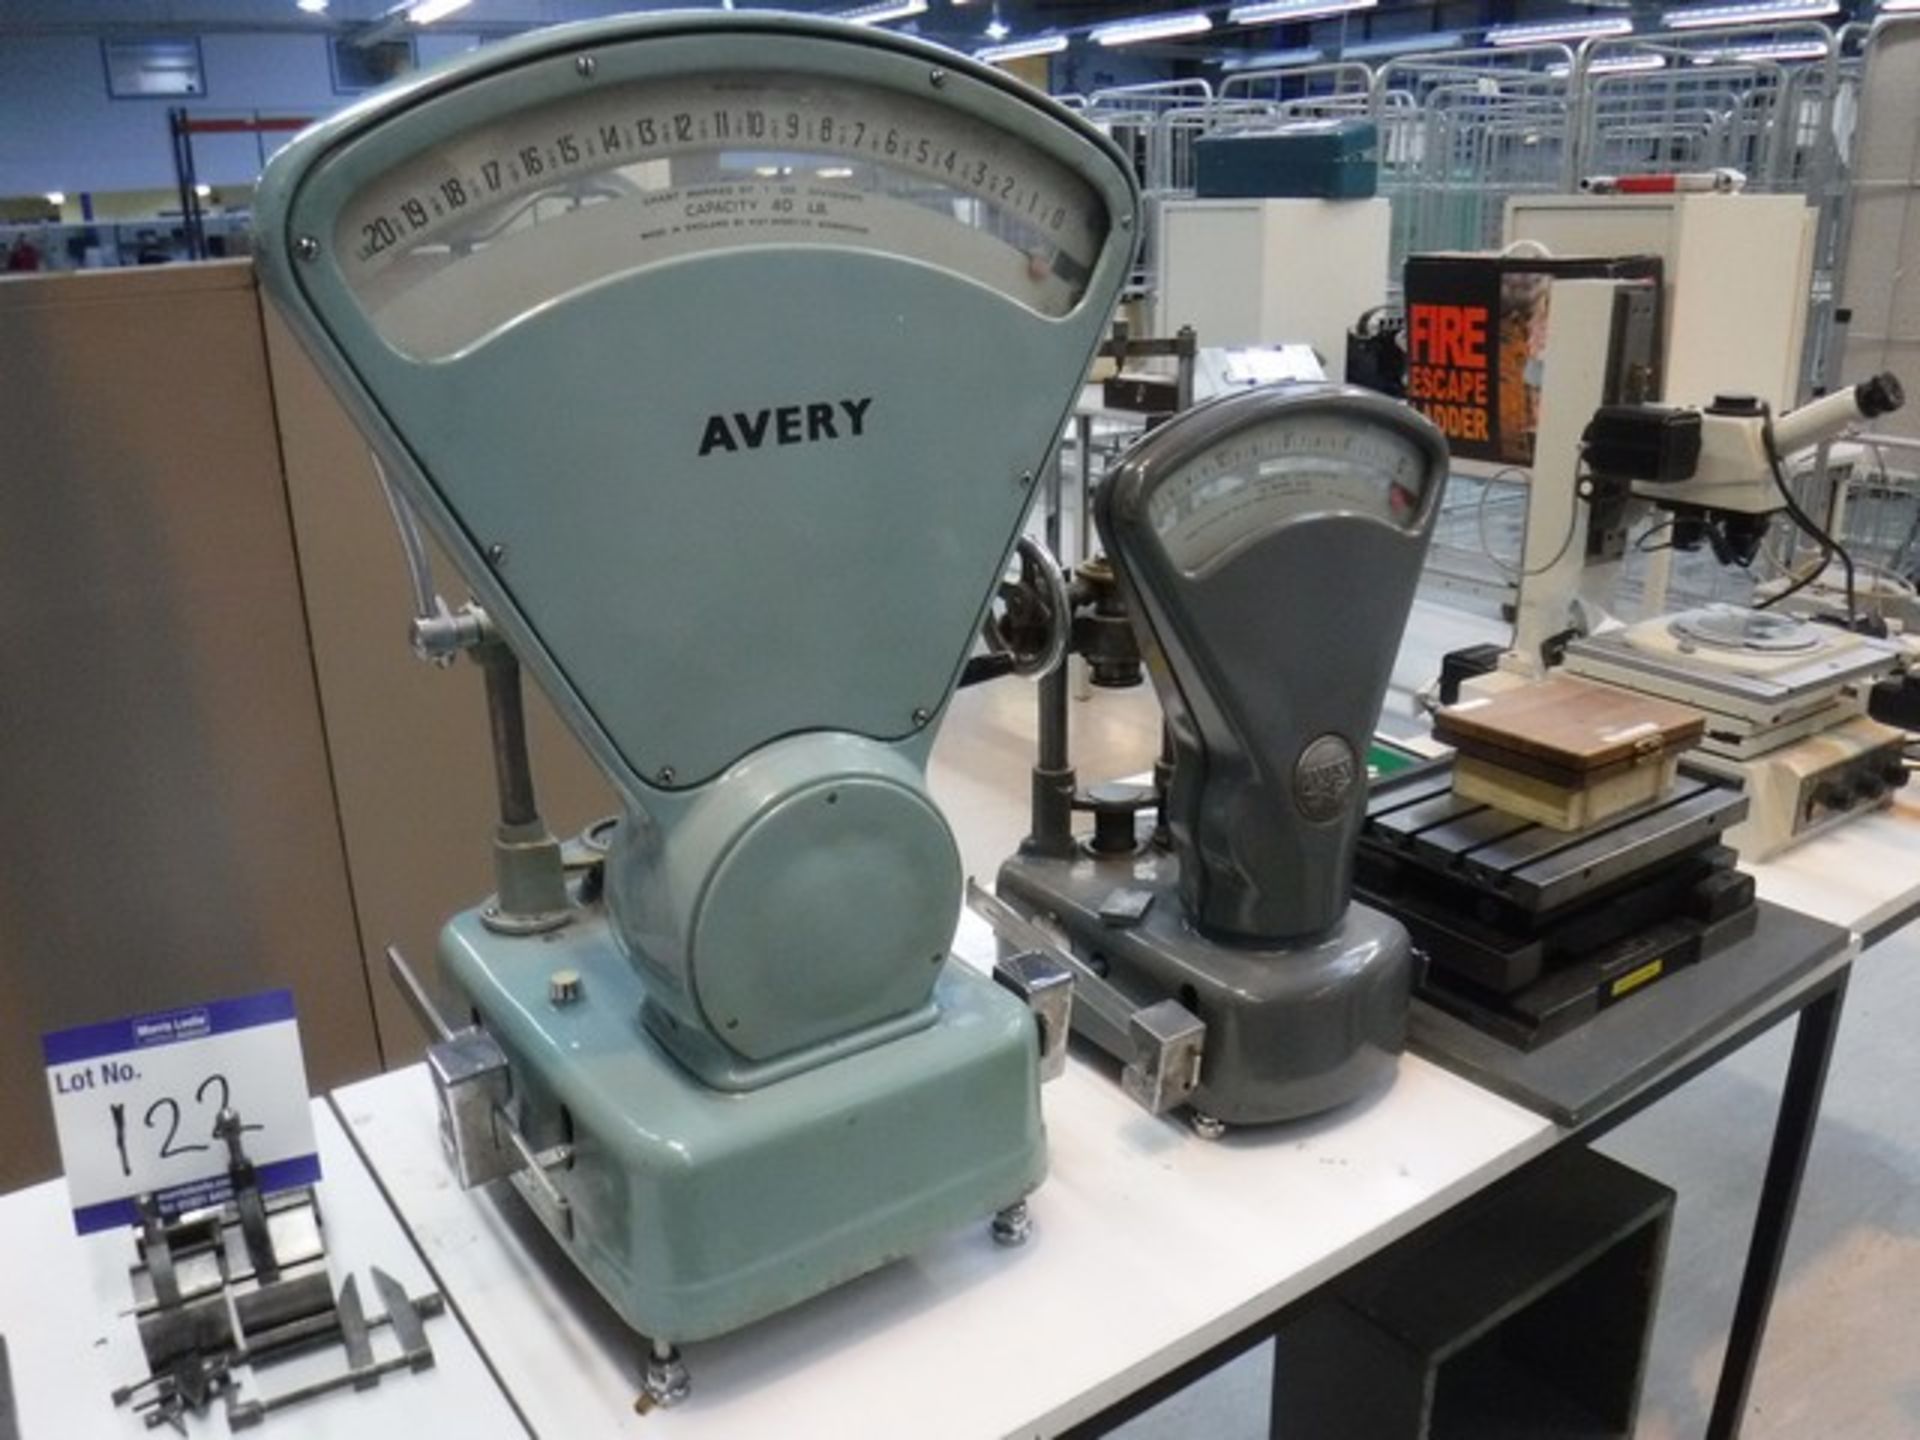 Avery spring force testers x2 - Bild 2 aus 2